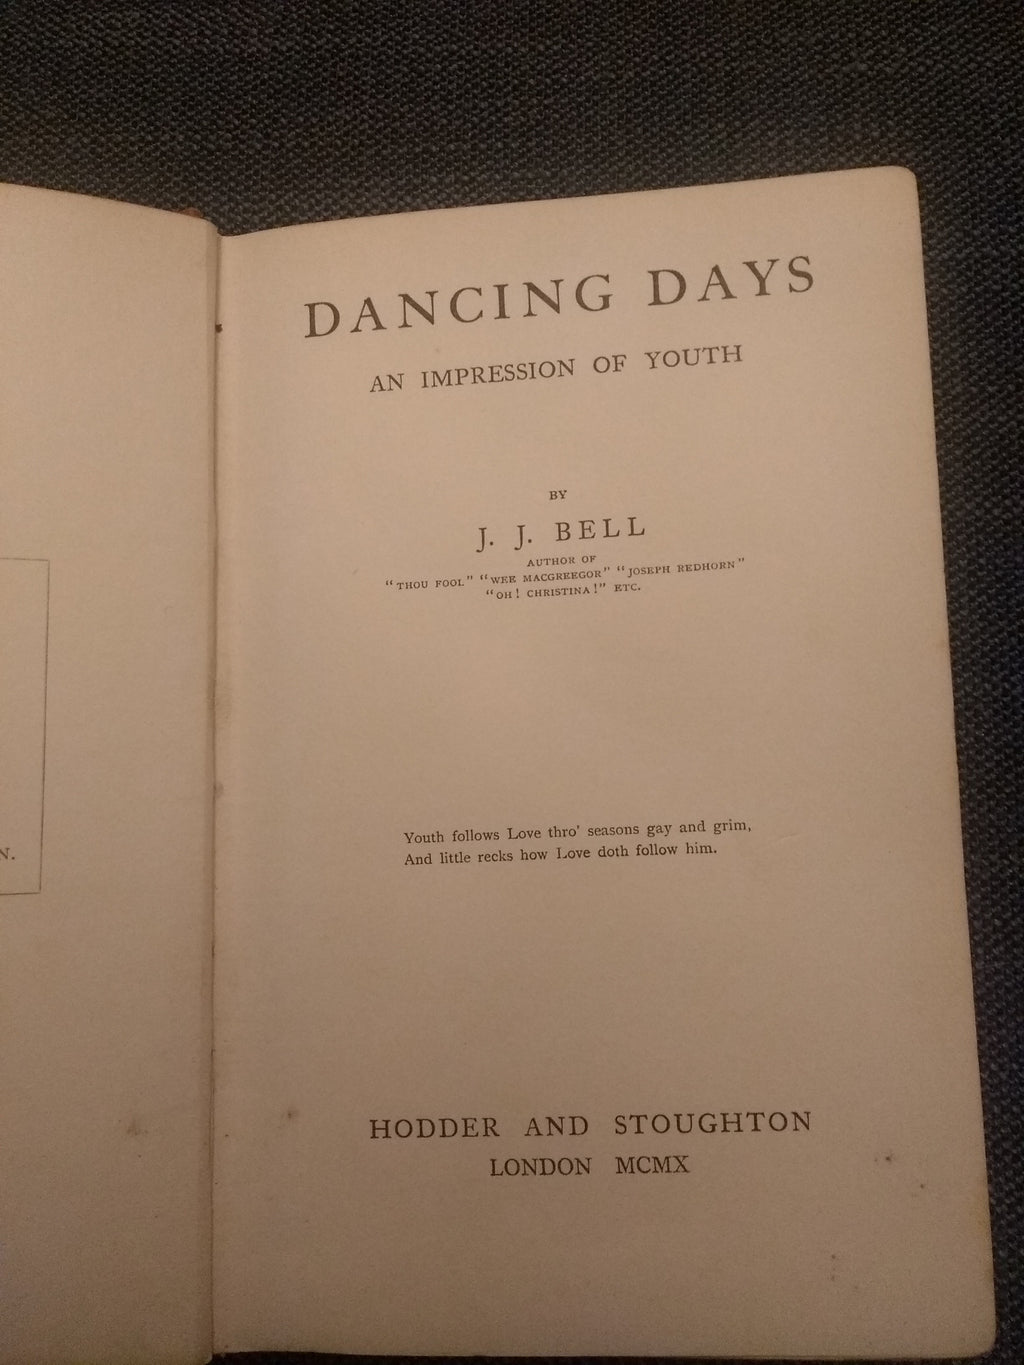 Dancing Days: An Impression of Youth, by J. J. BELL